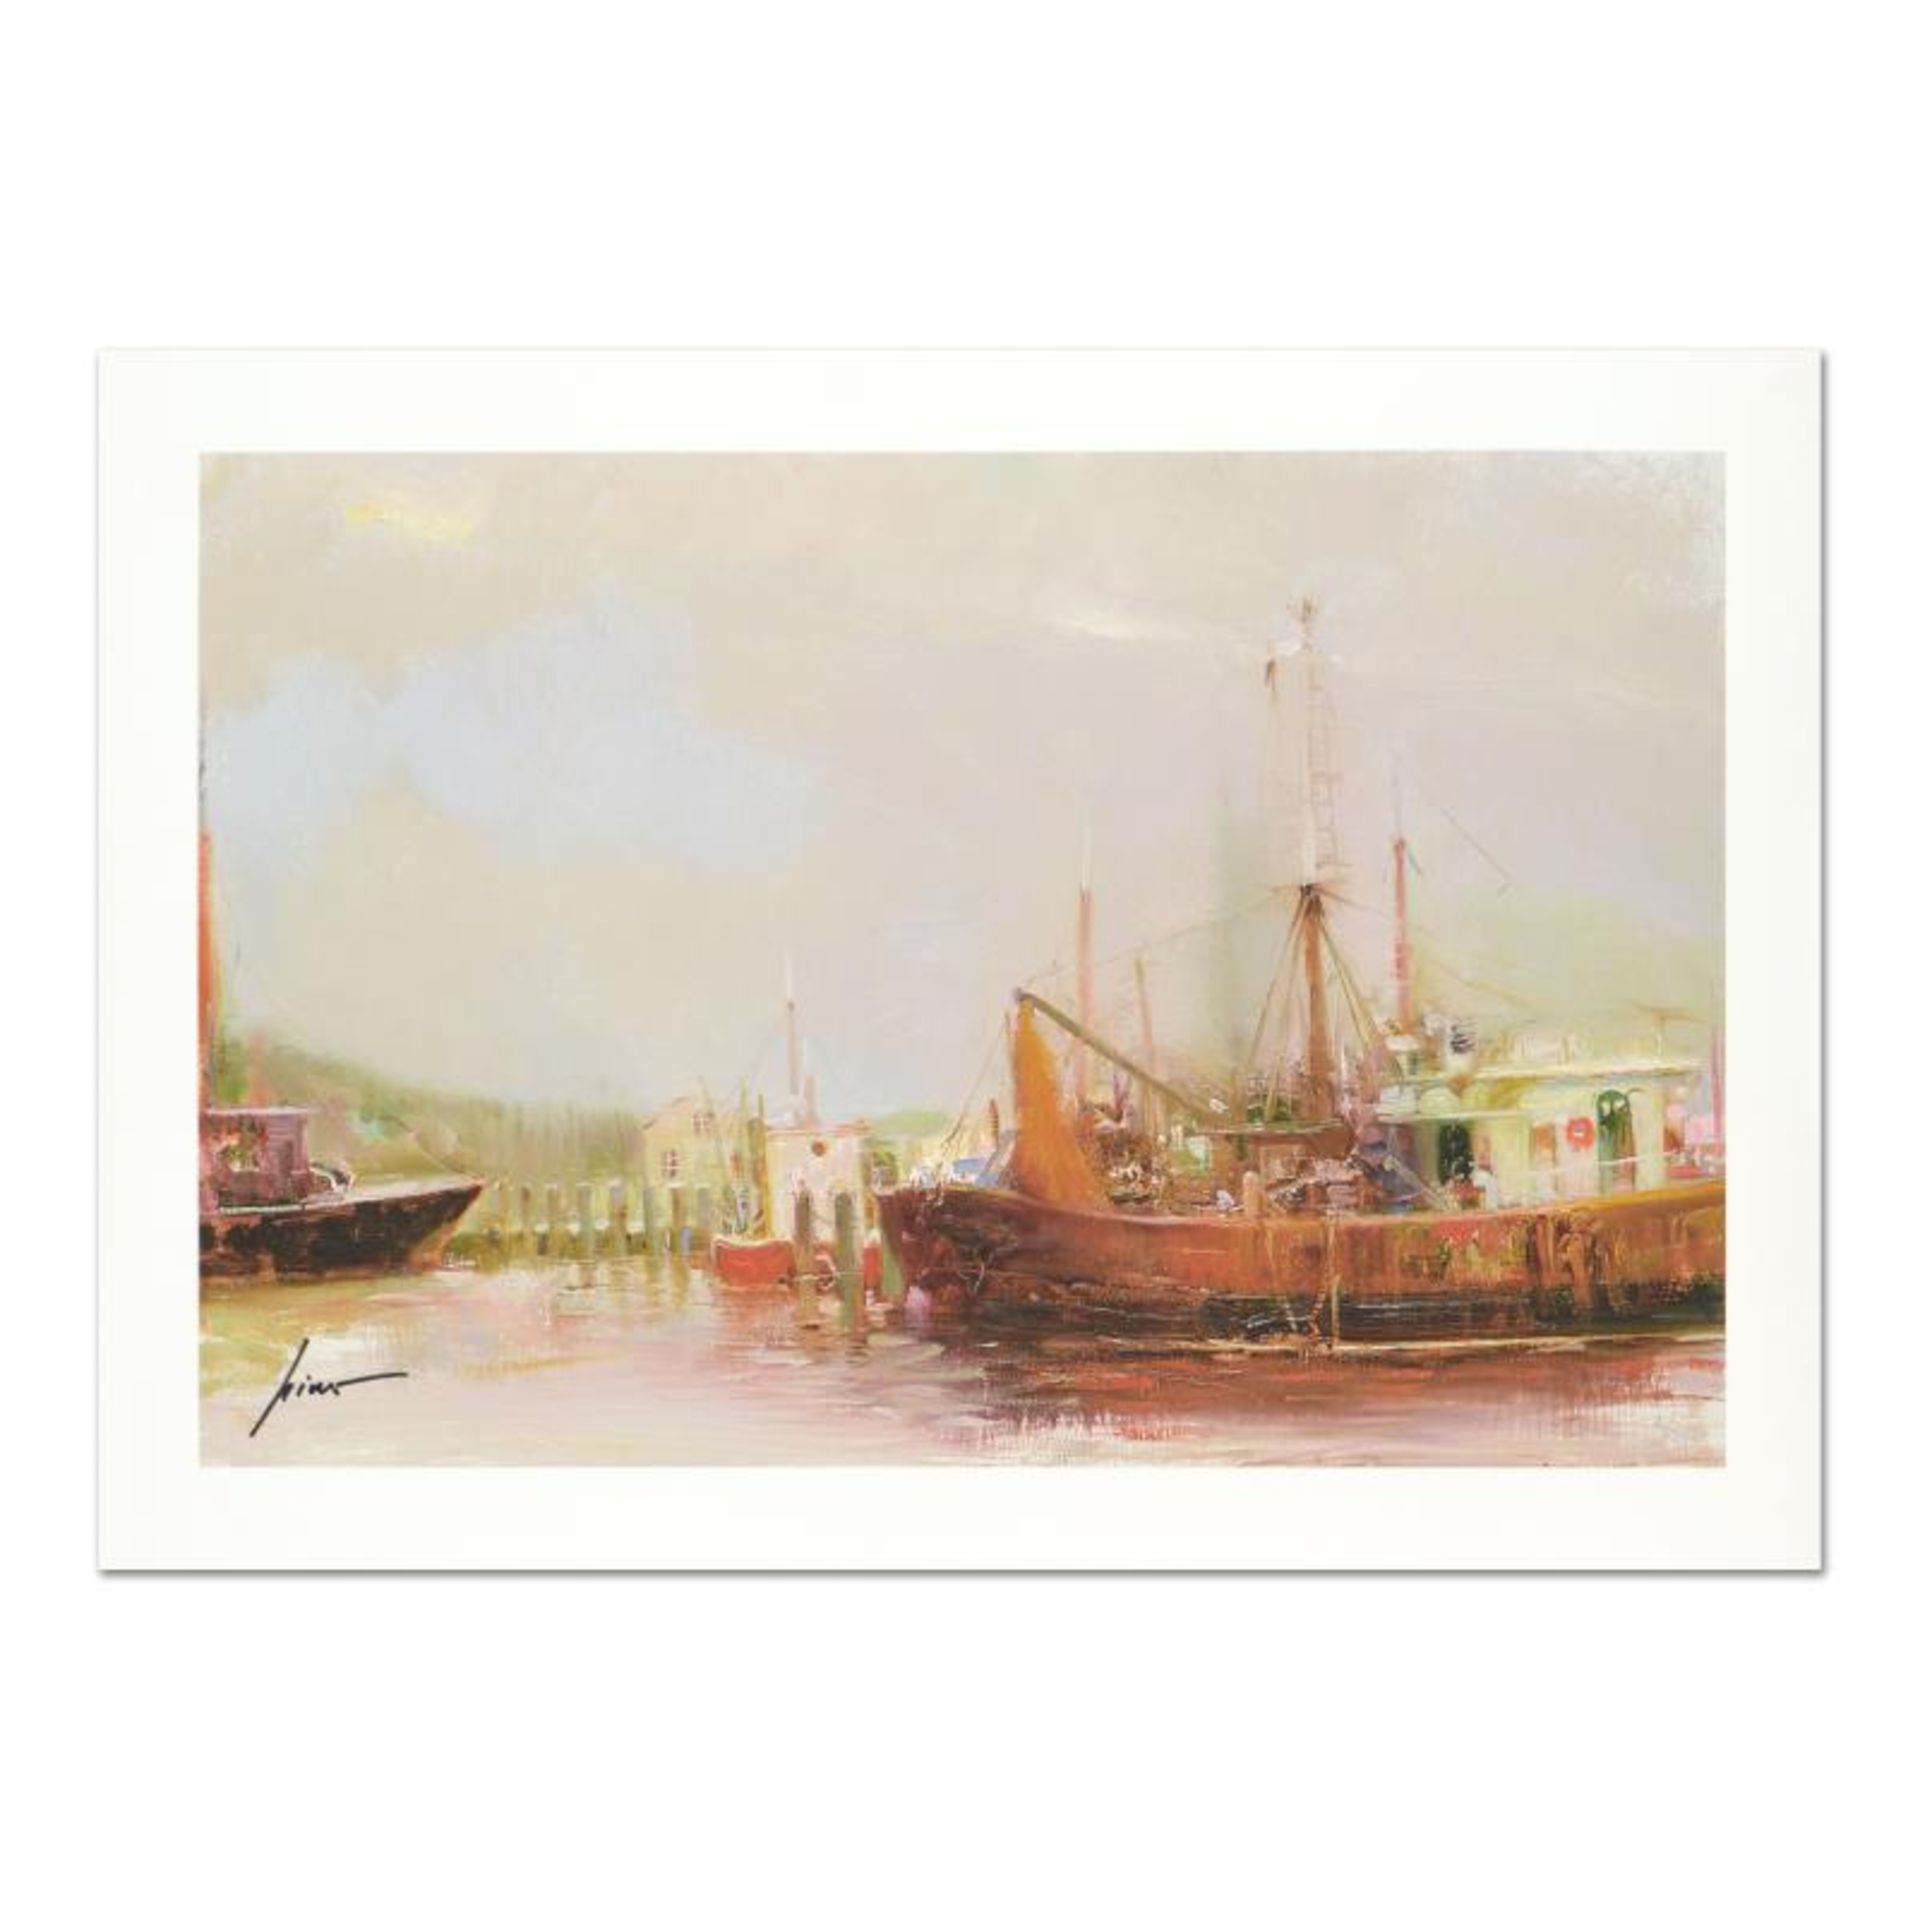 Pino (1931-2010), "At The Dock" Limited Edition on Canvas, Numbered and Hand Sig